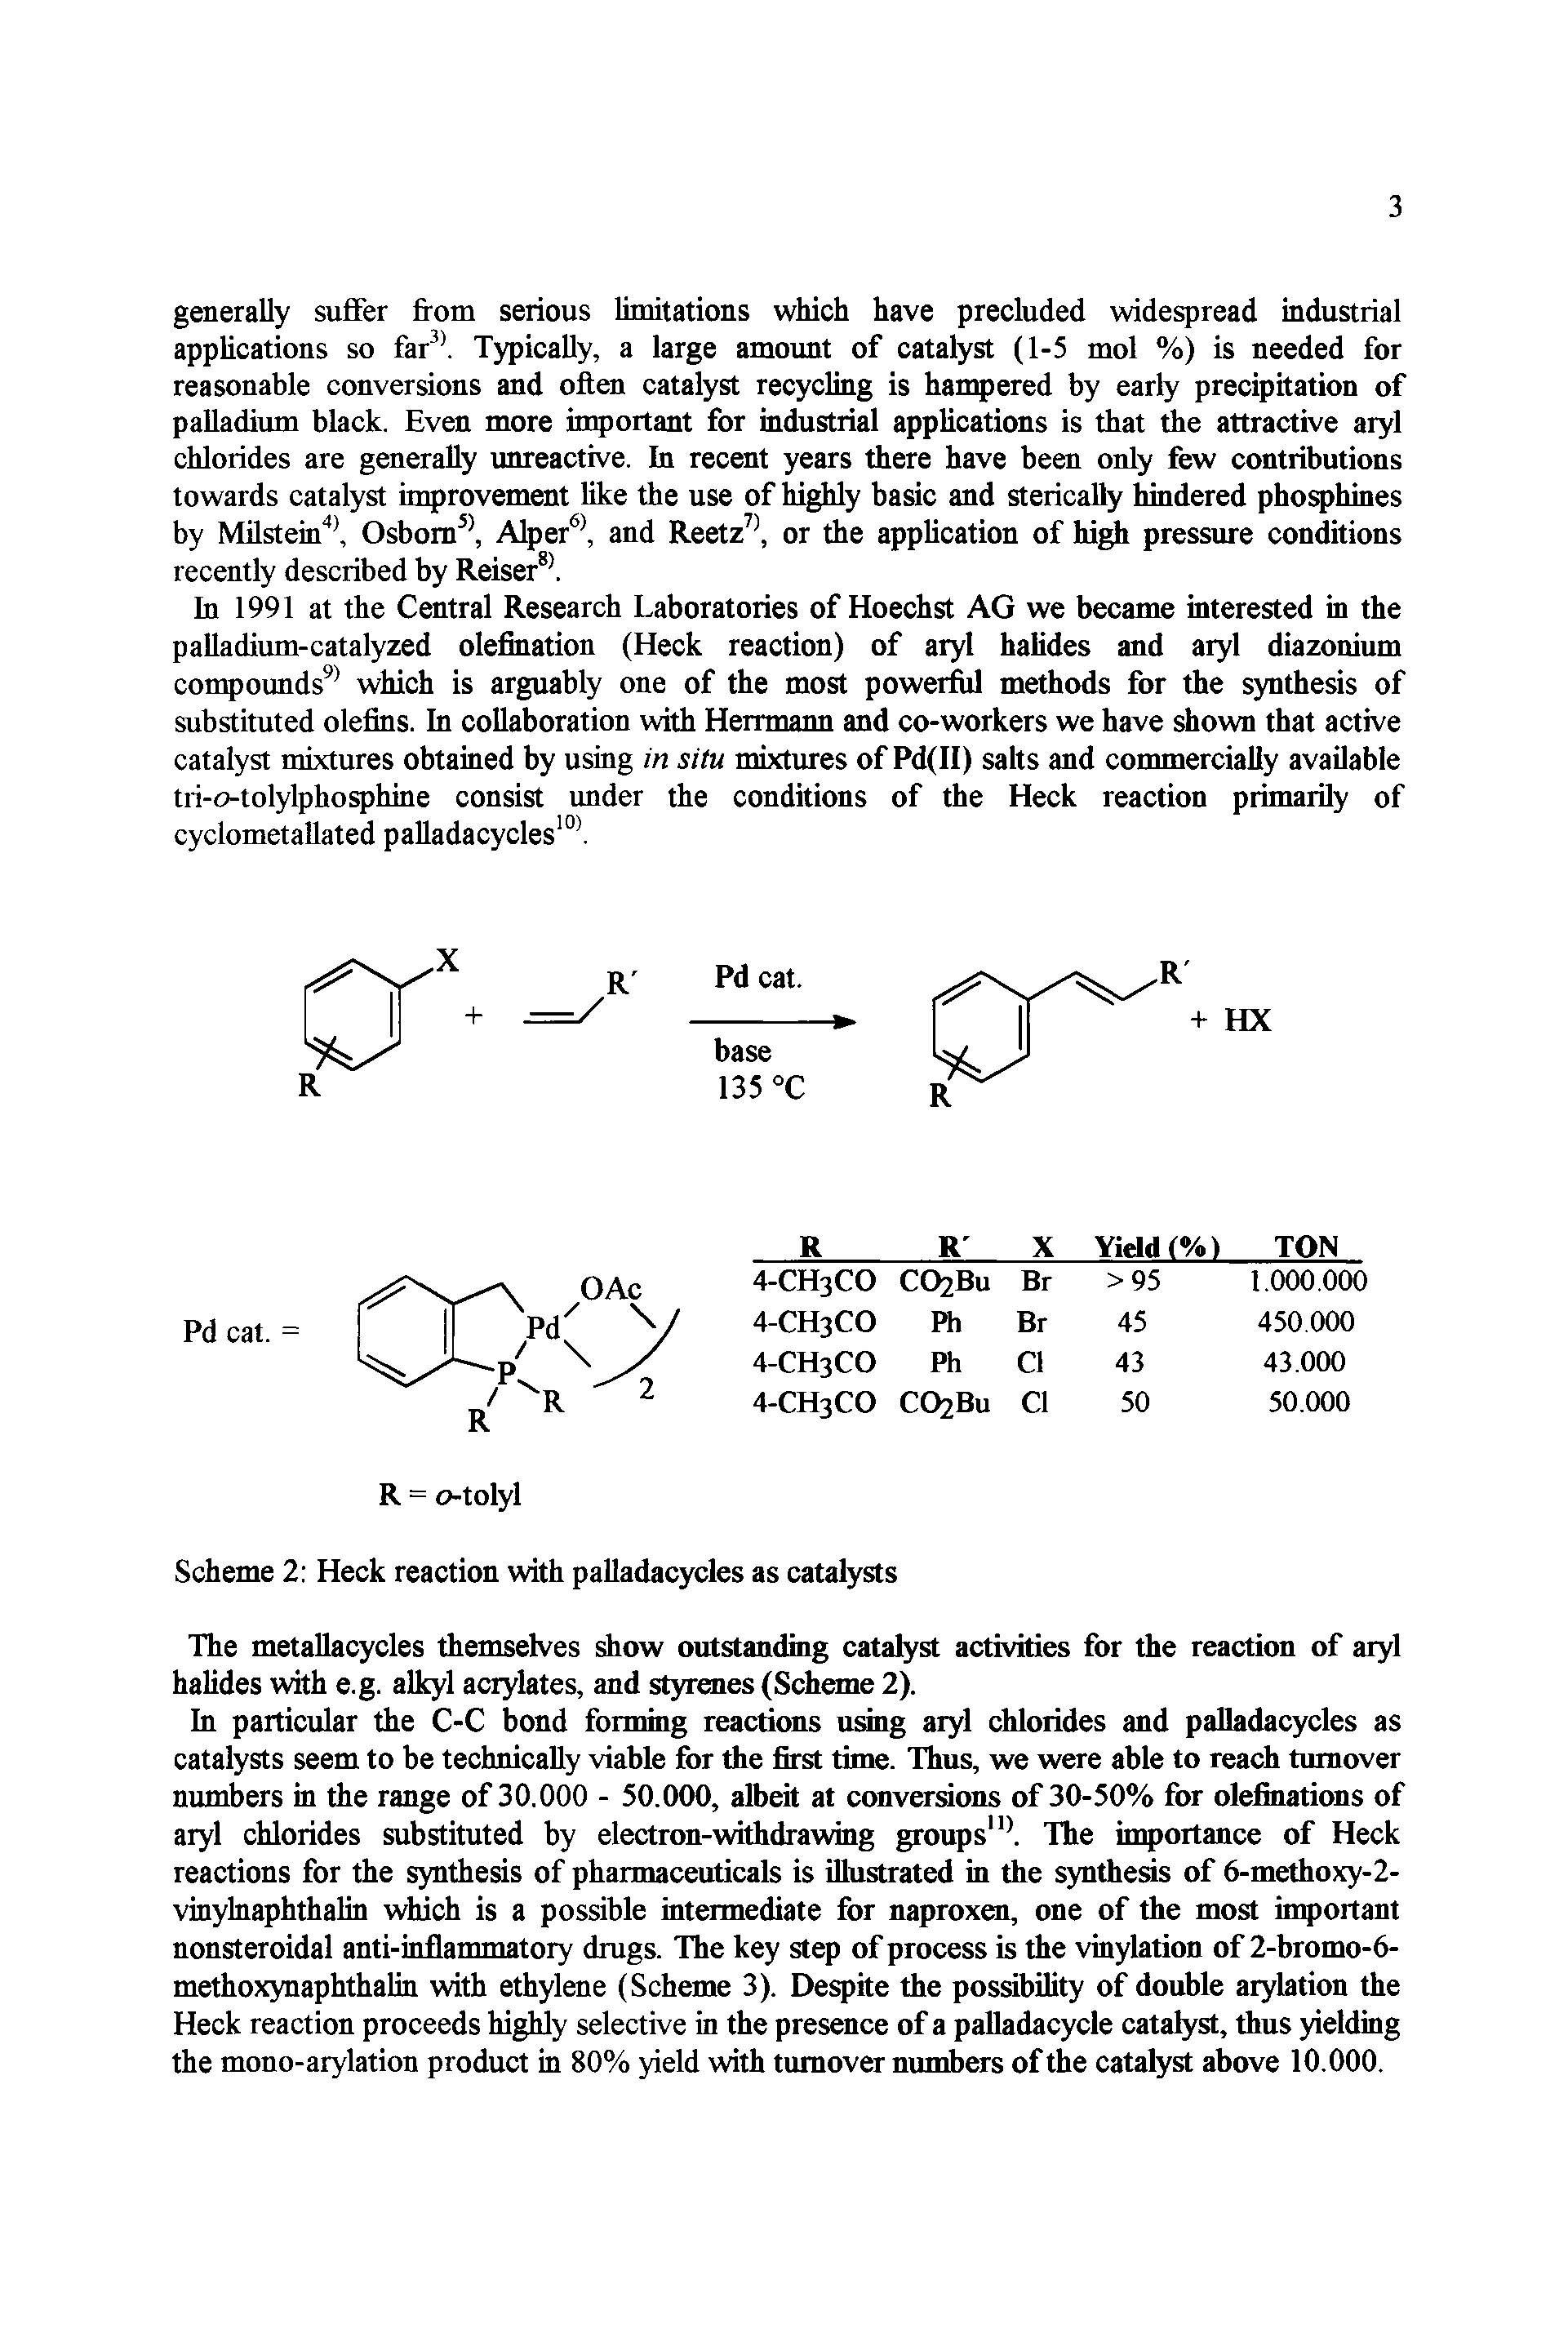 Scheme 2 Heck reaction with palladacycles as catalysts...